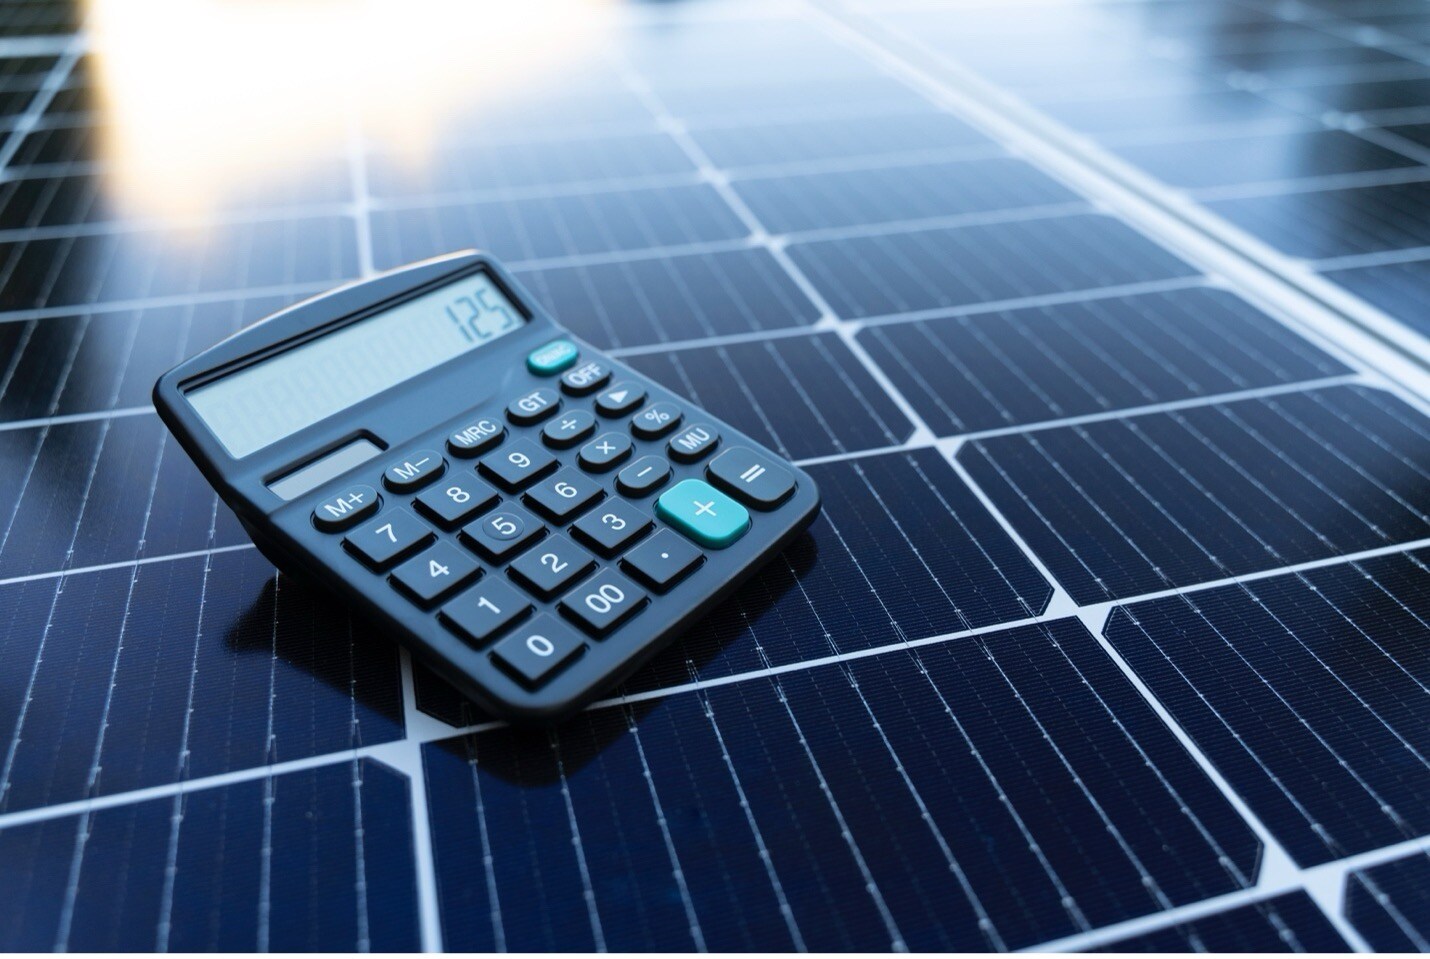 Read: From Sun to Savings: Calculating ROI for Commercial Solar Panel Installations